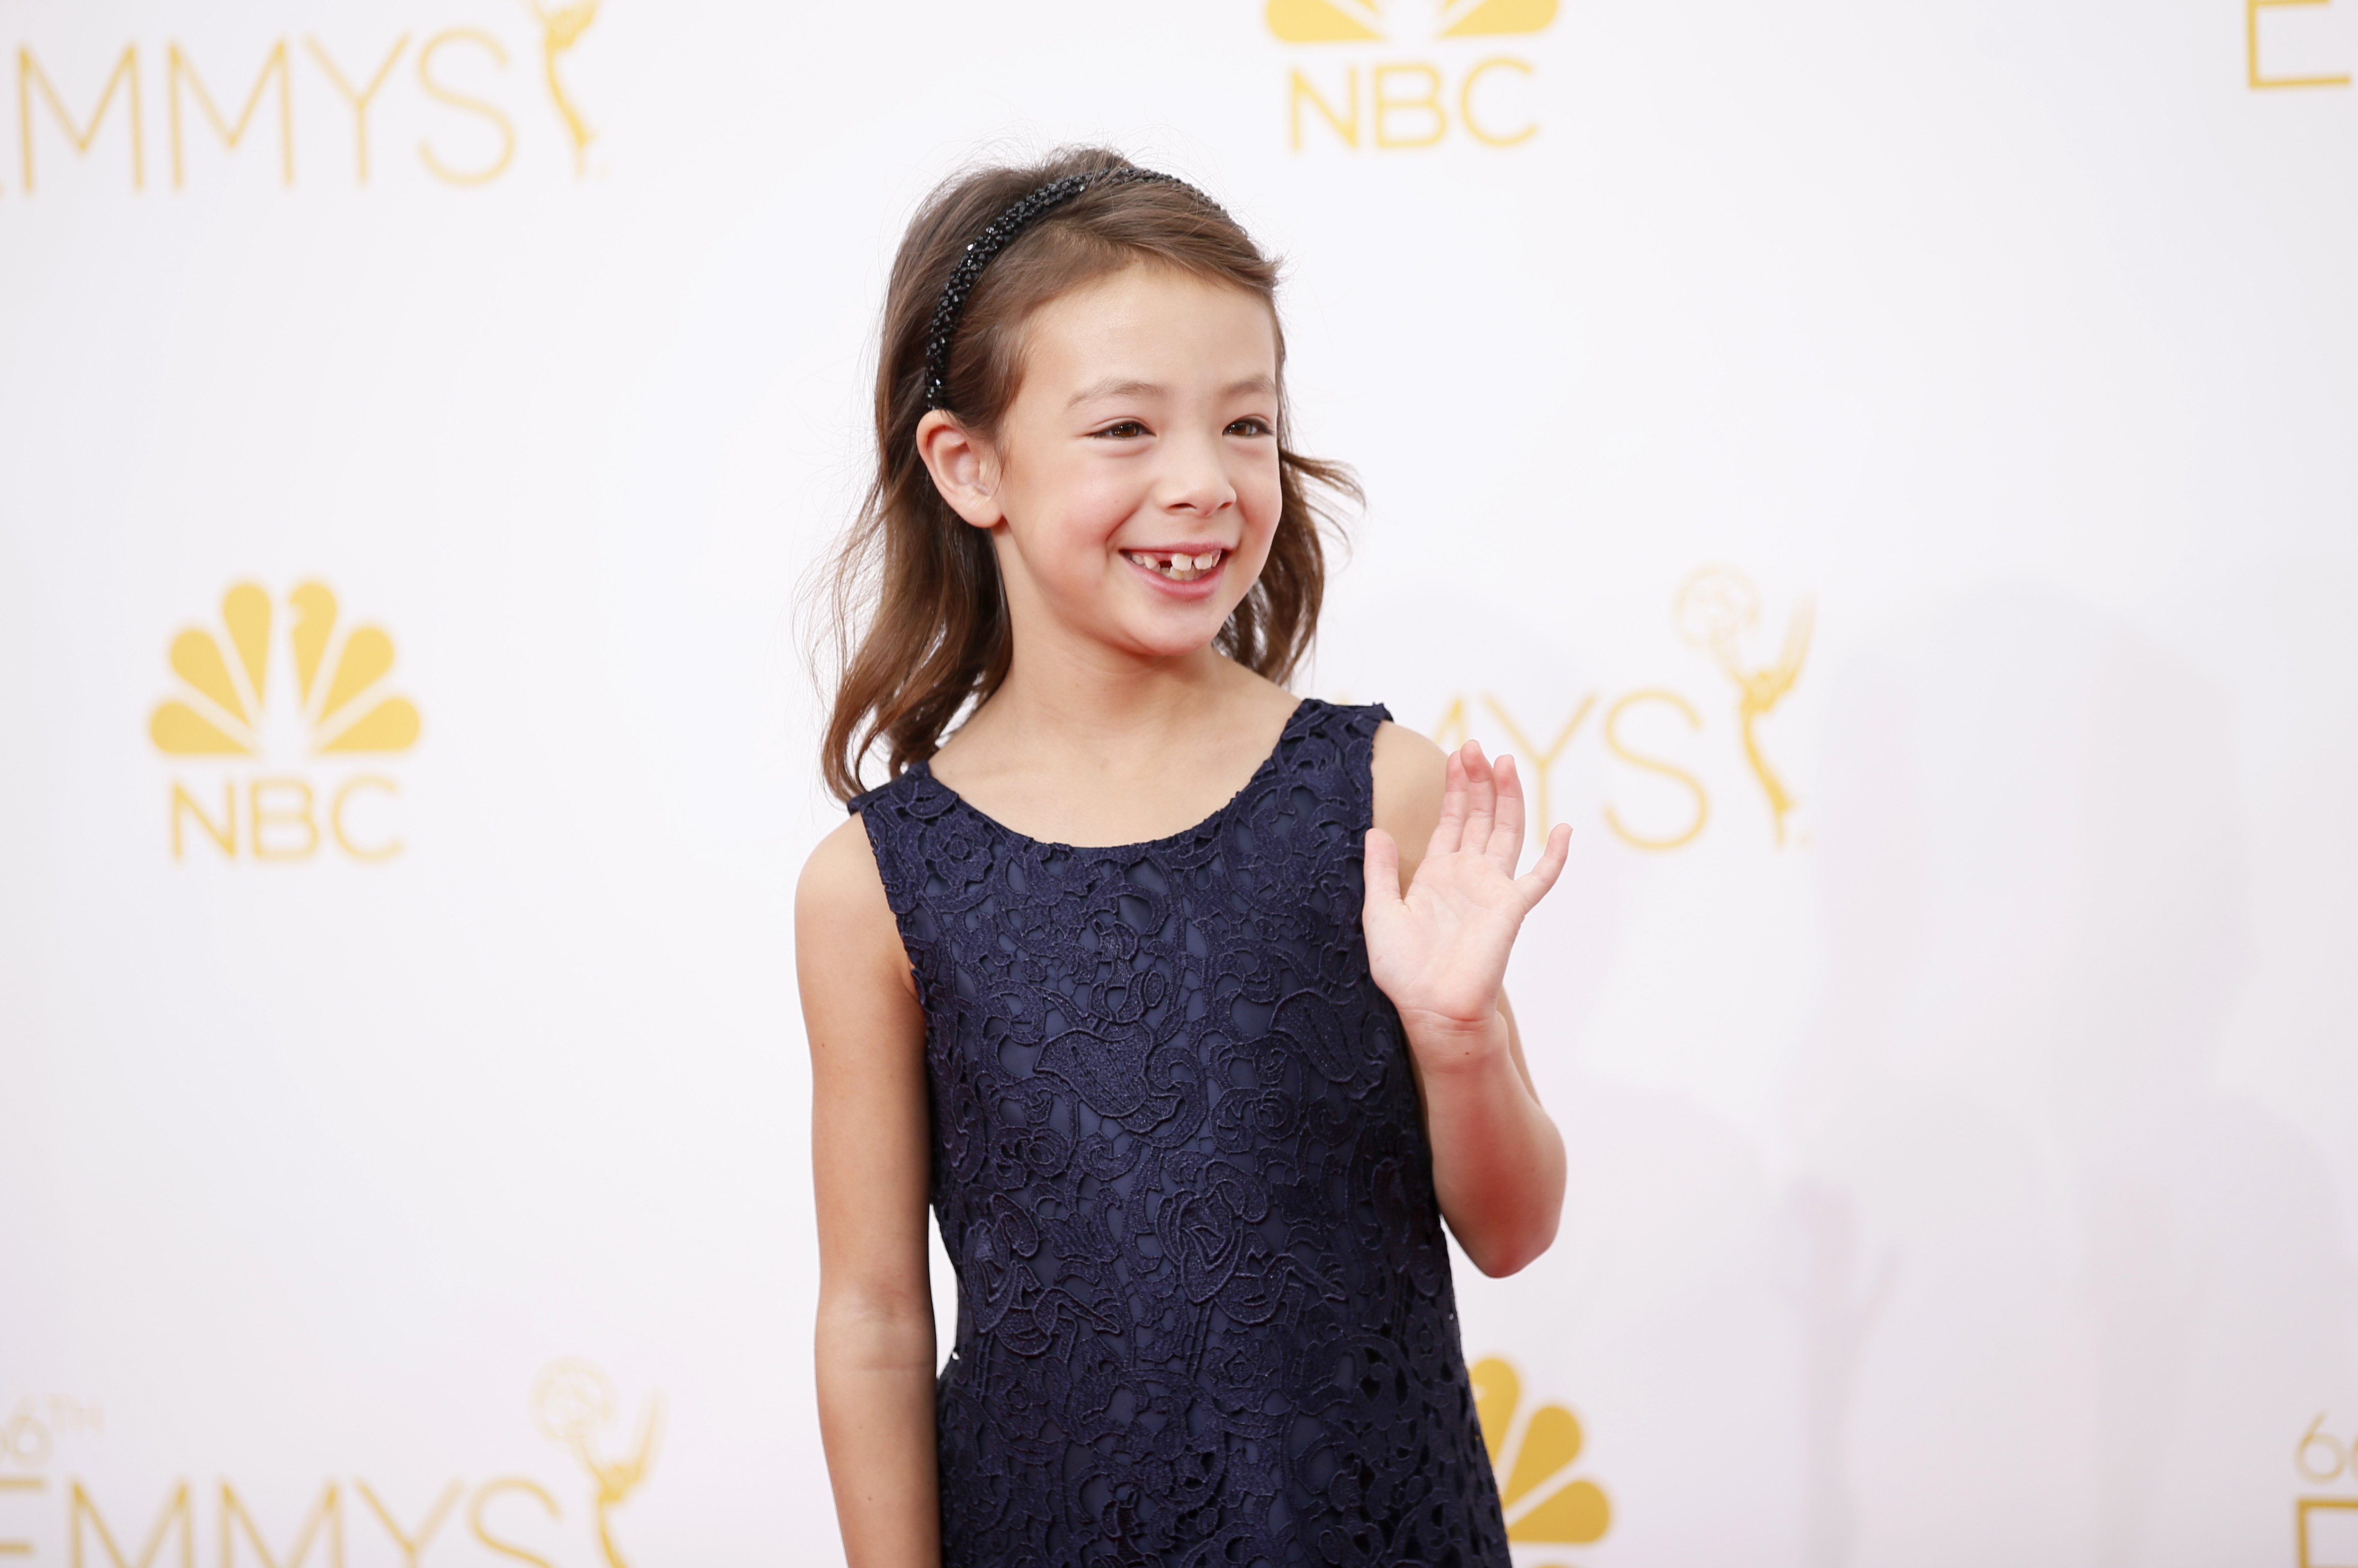 Aubrey Anderson-Emmons arrives at the 66th Primetime Emmy Awards at the Nokia Theatre L.A. Live on Monday, Aug. 25, 2014, in Los Angeles.